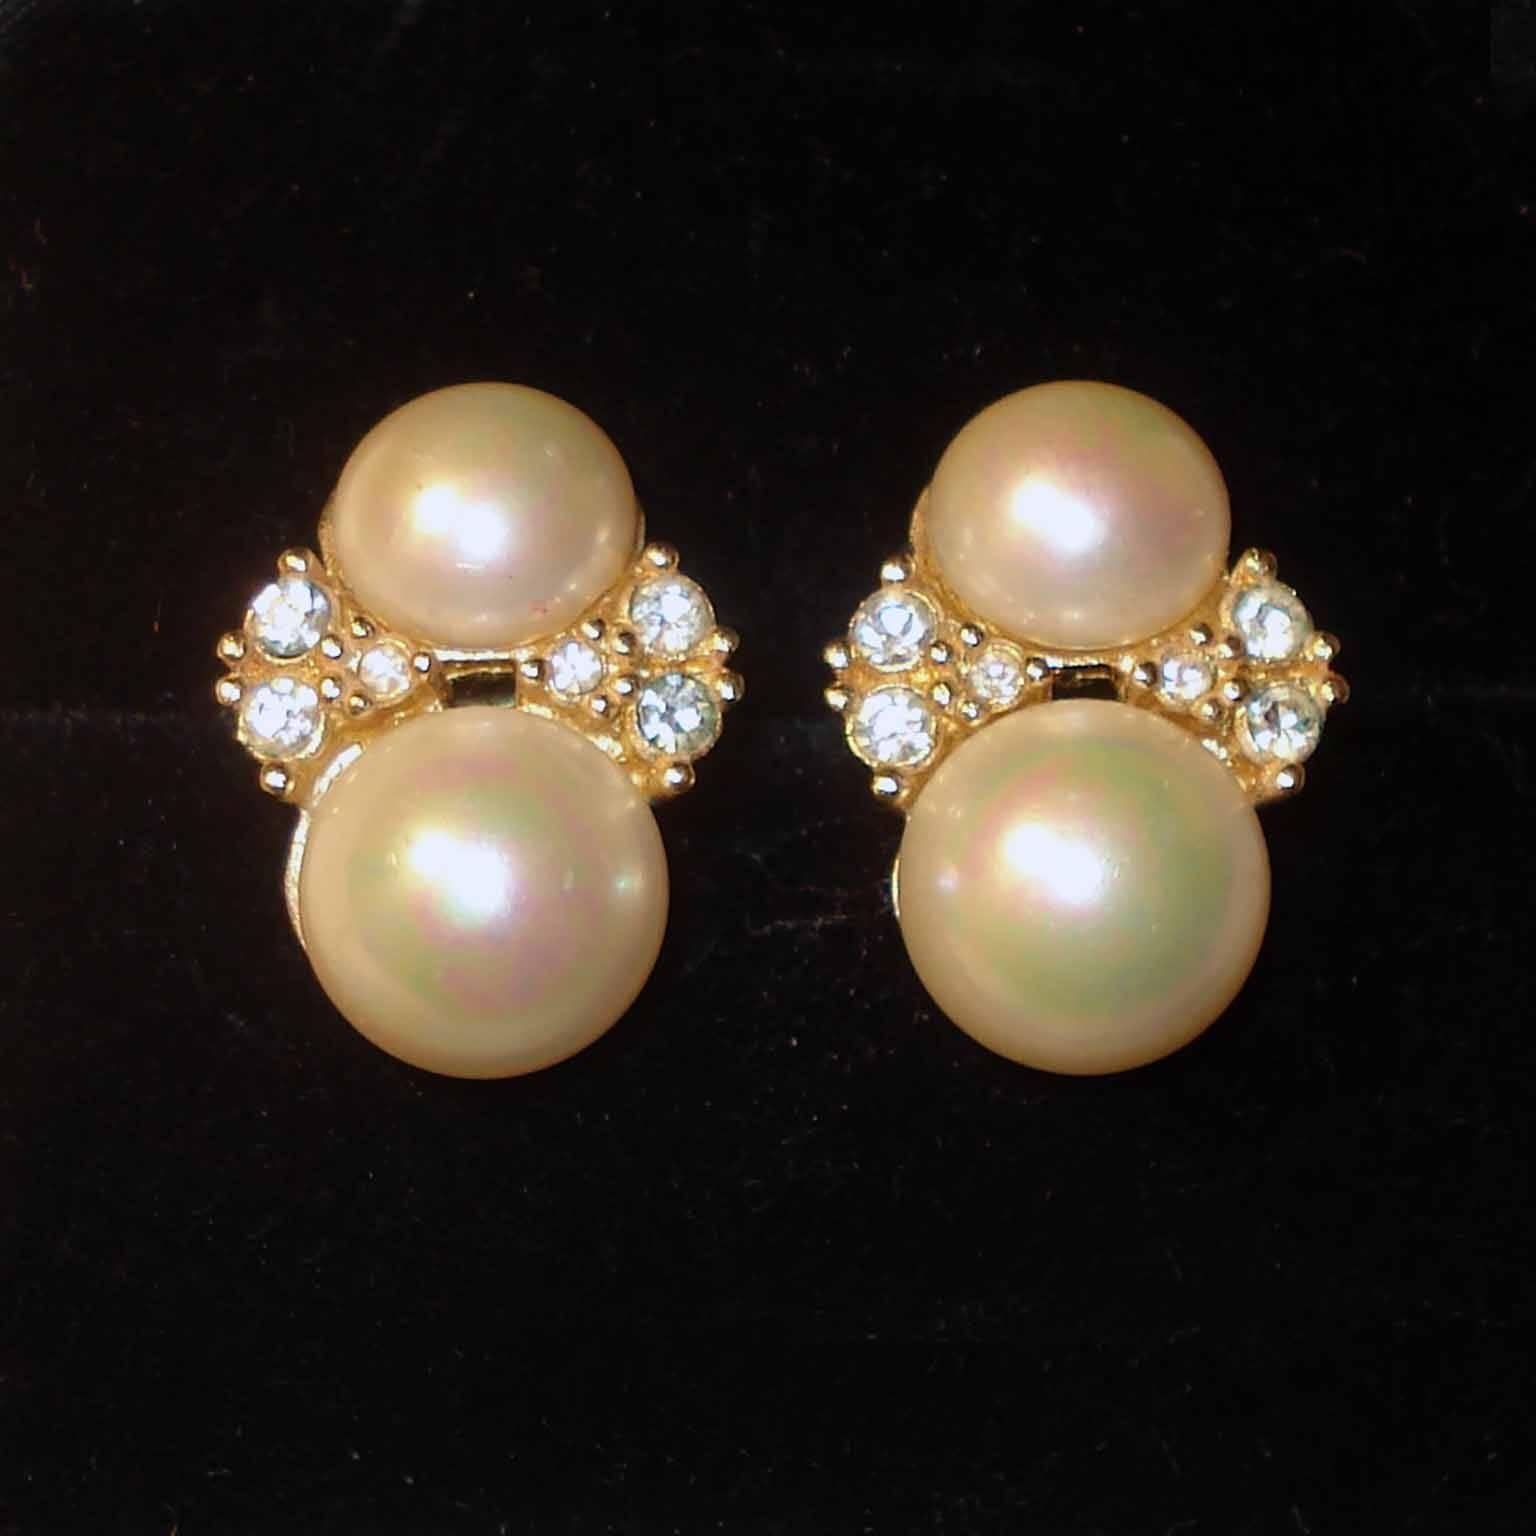 Christian Dior earrings,
France, 1980s.

Wonderful vintage gold plated clip-on earrings made by Christian Dior.
A duet of faux pearls with round-cut clear Swarovski crystal detail.
Signed Christian Dior.

Dimensions:
Height 2.5 cm (1 in.),